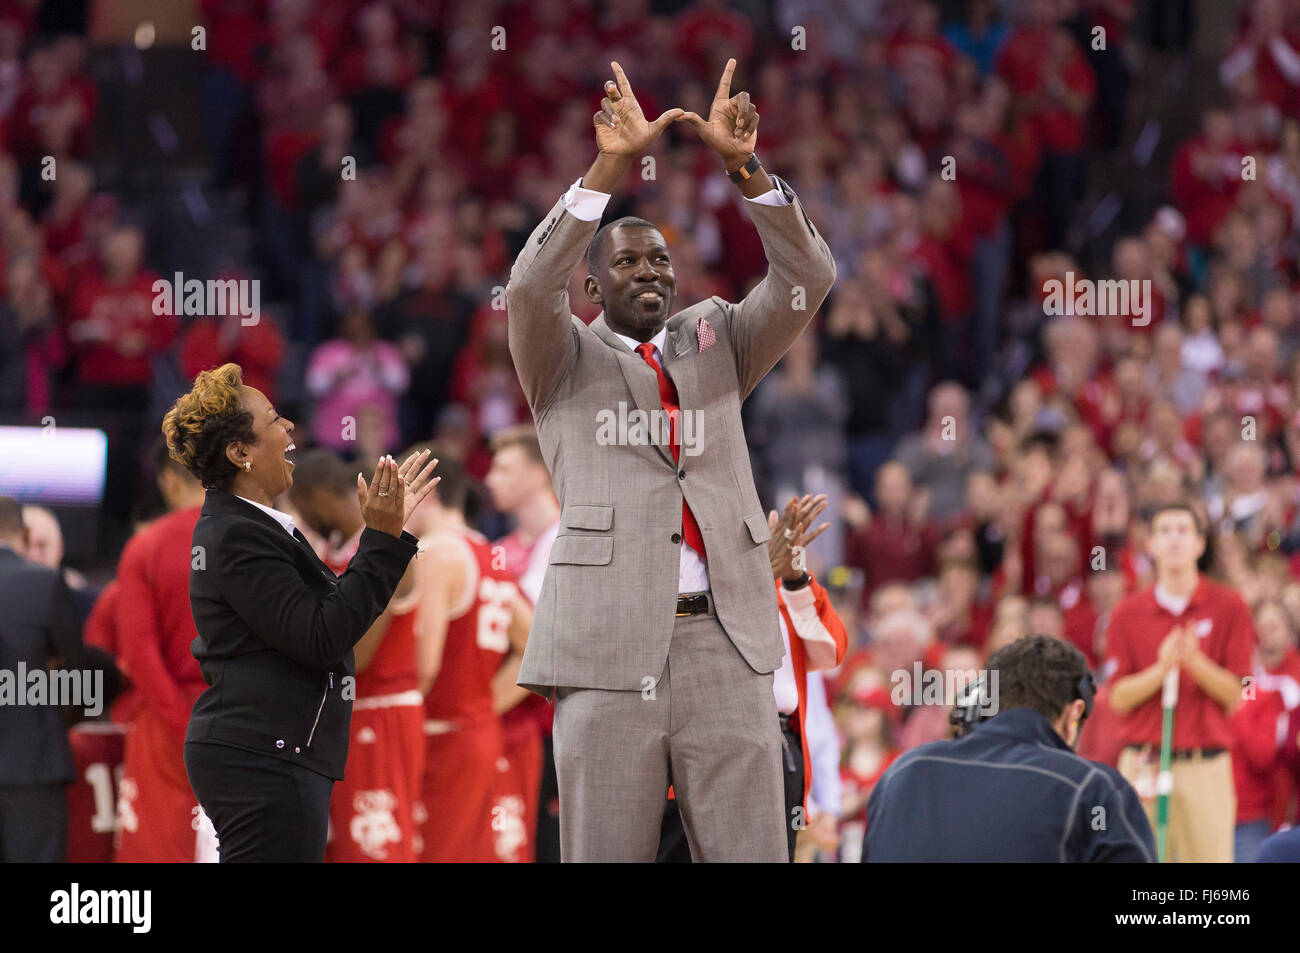 Wisconsin Badgers set to retire Michael Finley's number on Sunday